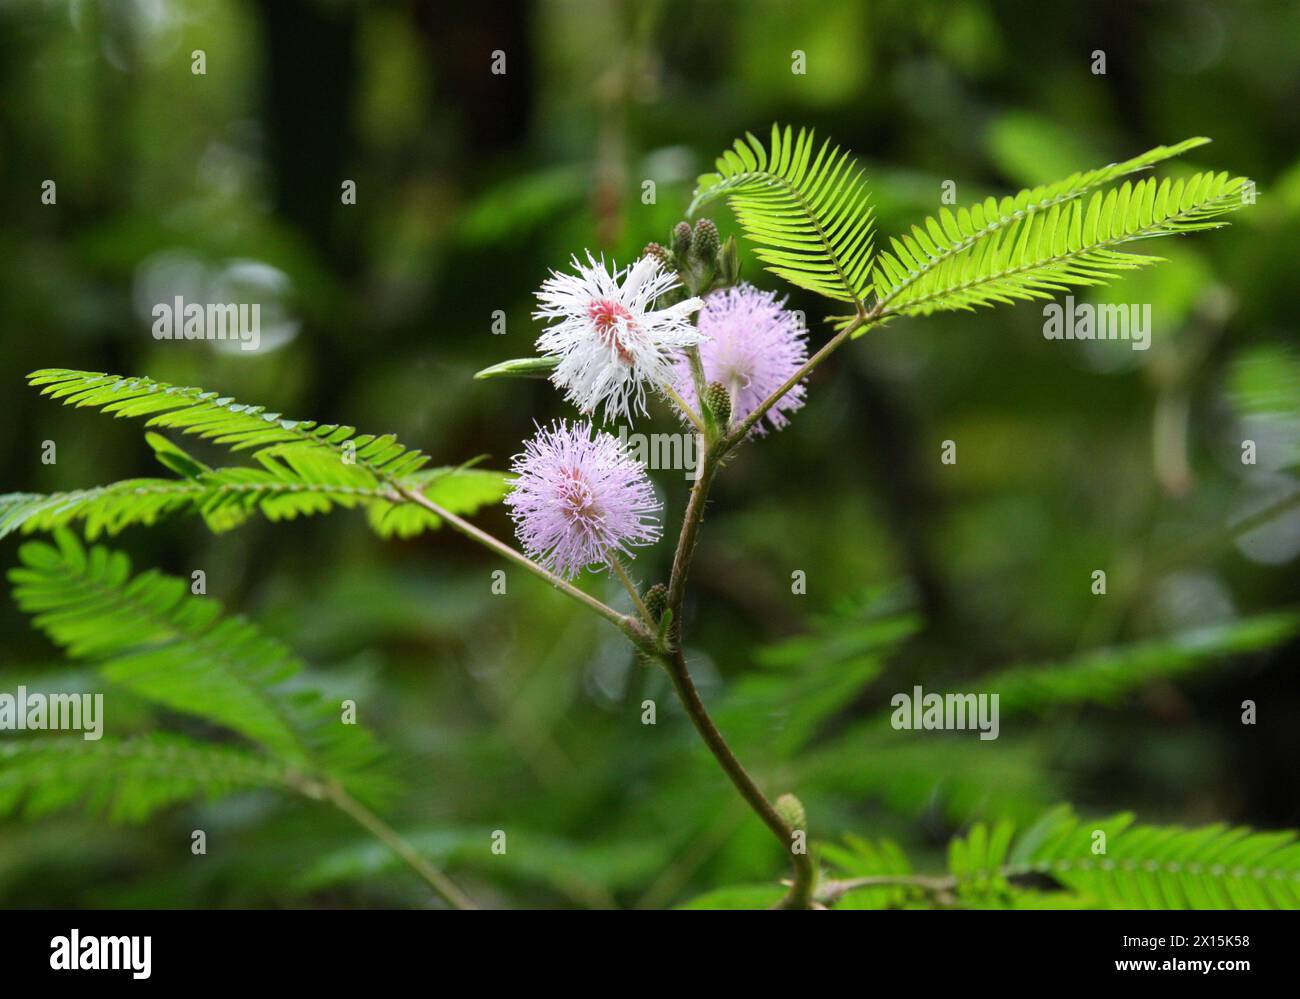 Sensitive Plant, Sleepy Plant, Action Plant, Dormilones, Touch-me-not, Shameplant, Zombie Plant, or Shy Plant, Mimosa pudica,  Arenal, Costa Rica. Stock Photo